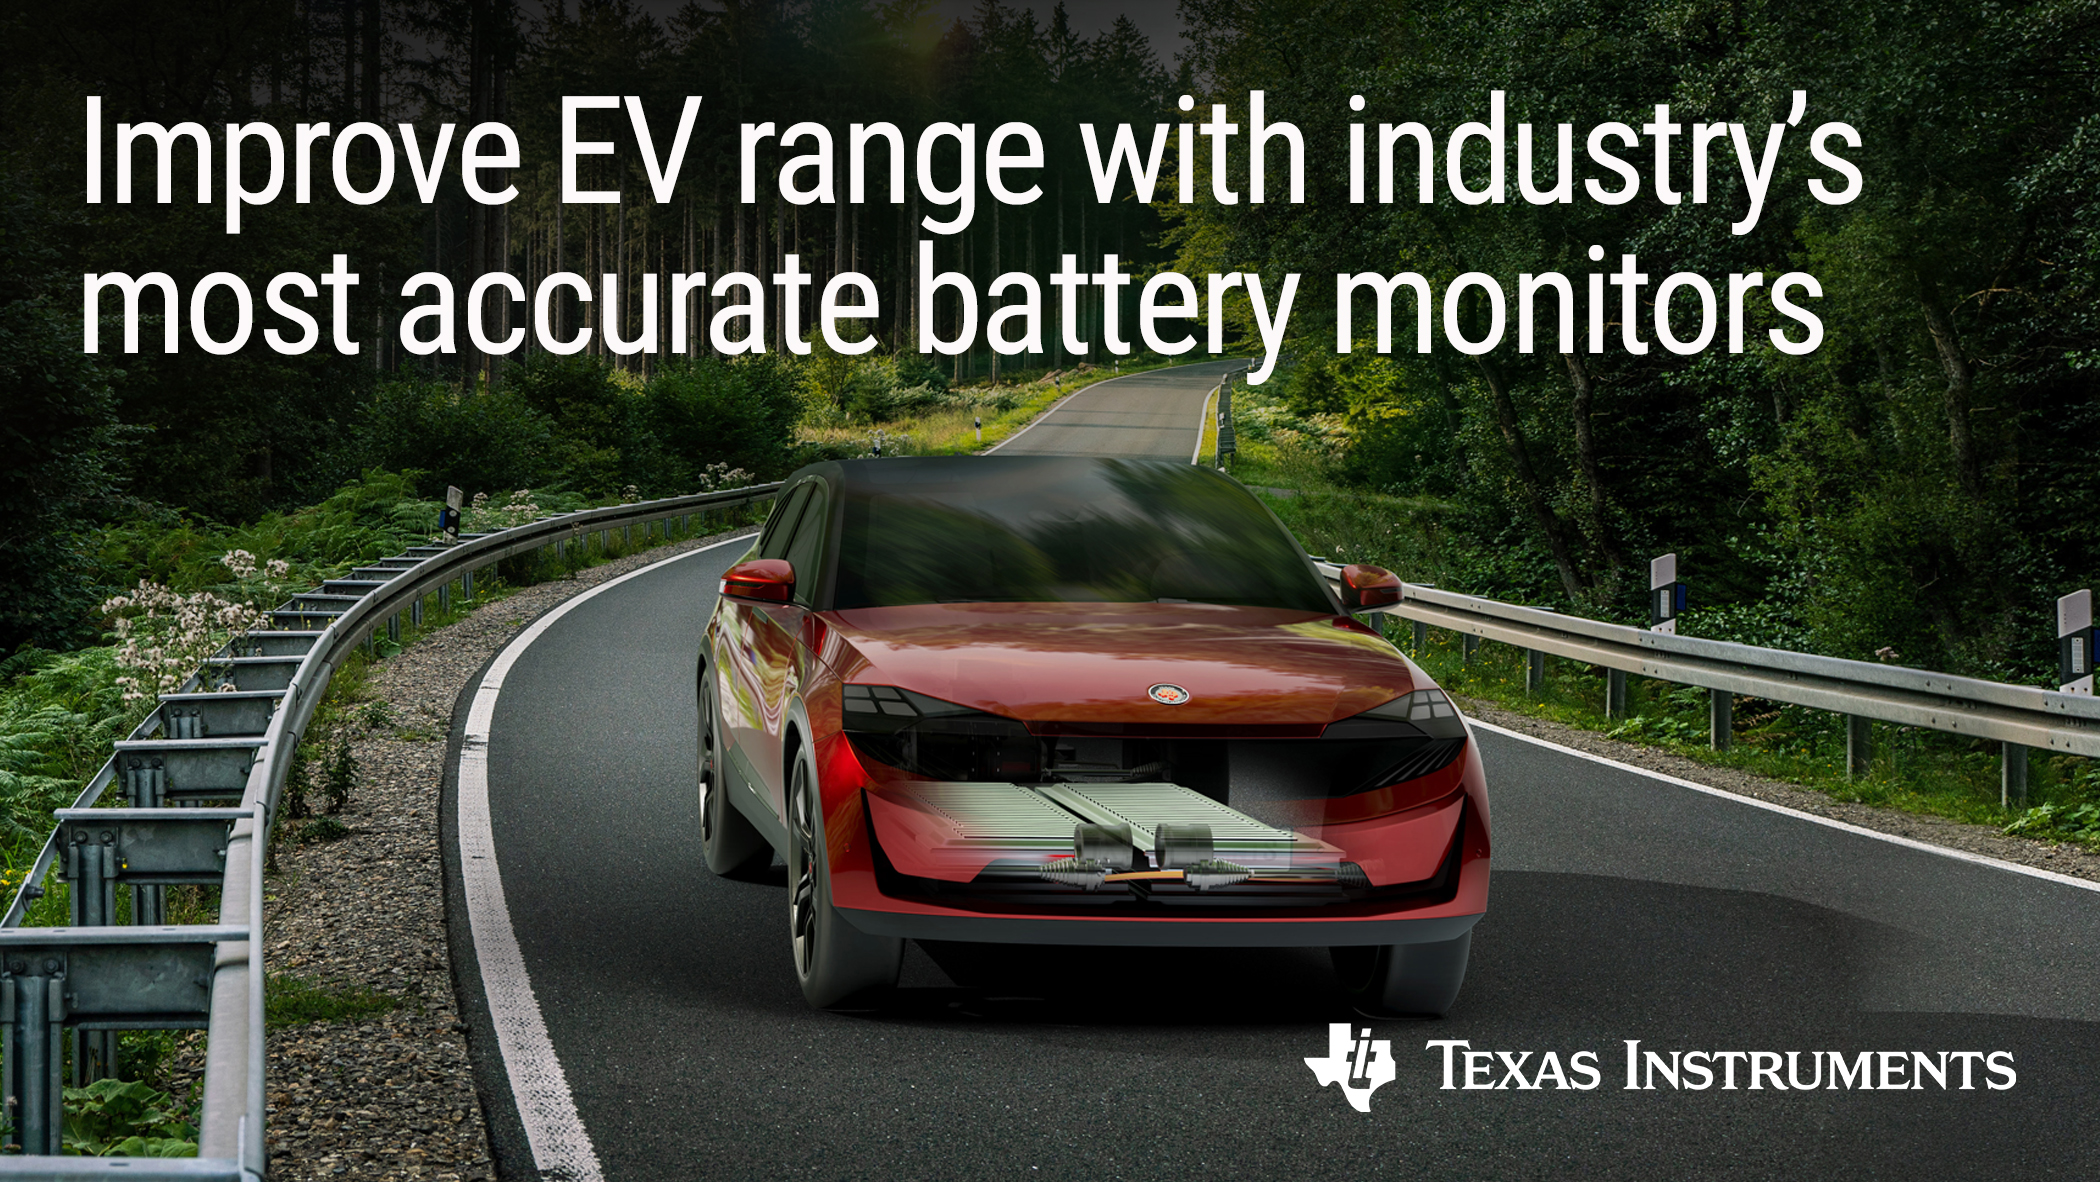 TI Enables Automakers to Take Full Advantage of EV Range with the Industry's Most Accurate Battery Cell and Pack Monitors